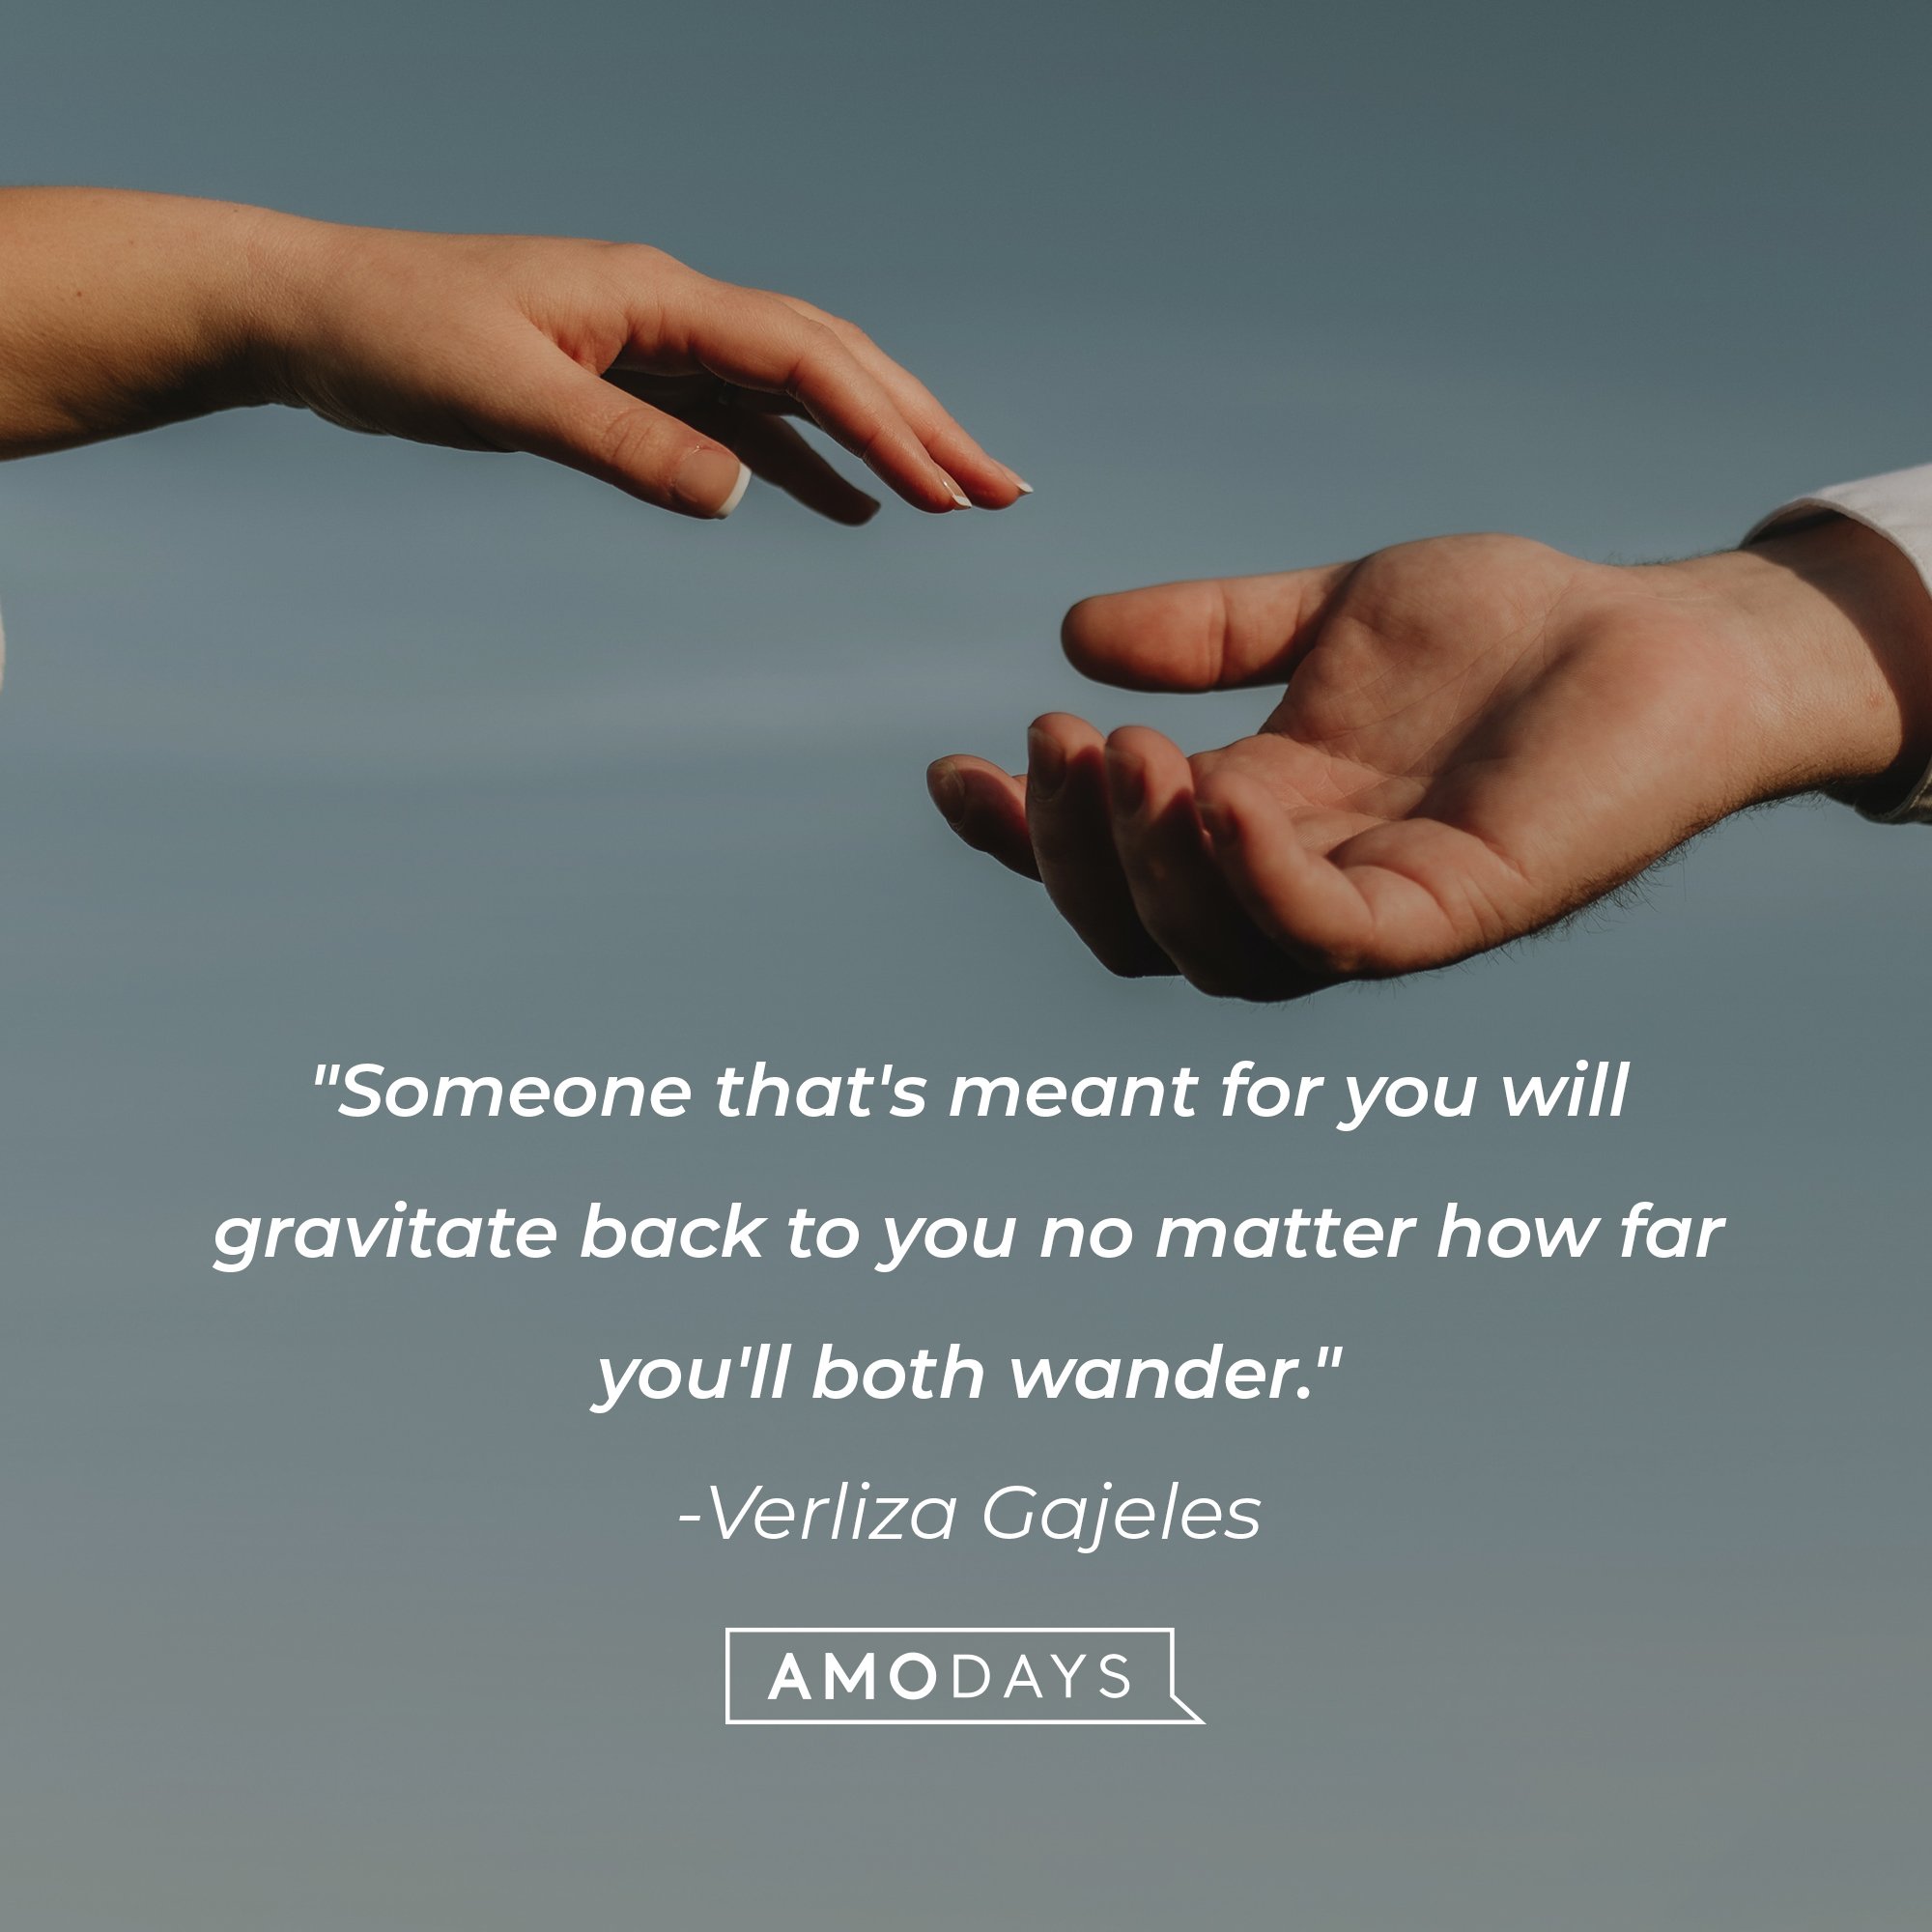  Verliza Gajeles’ quote: "Someone that's meant for you will gravitate back to you no matter how far you'll both wander."  | Image: AmoDays